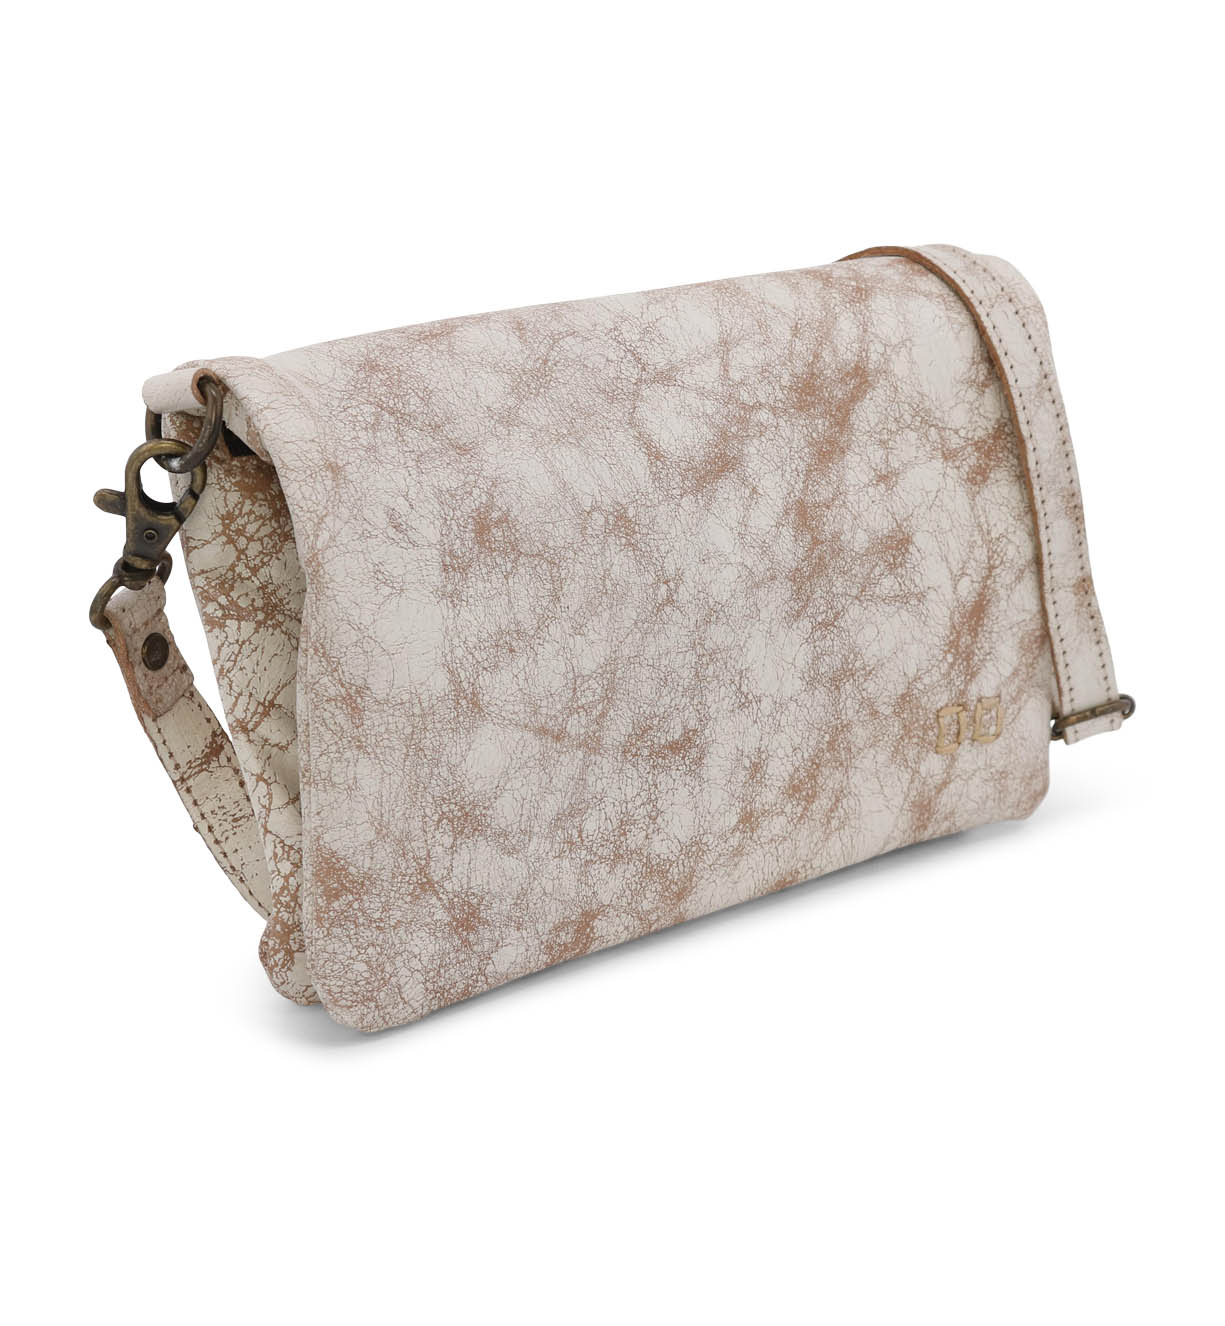 A white Cadence crossbody bag with a strap from Bed Stu.